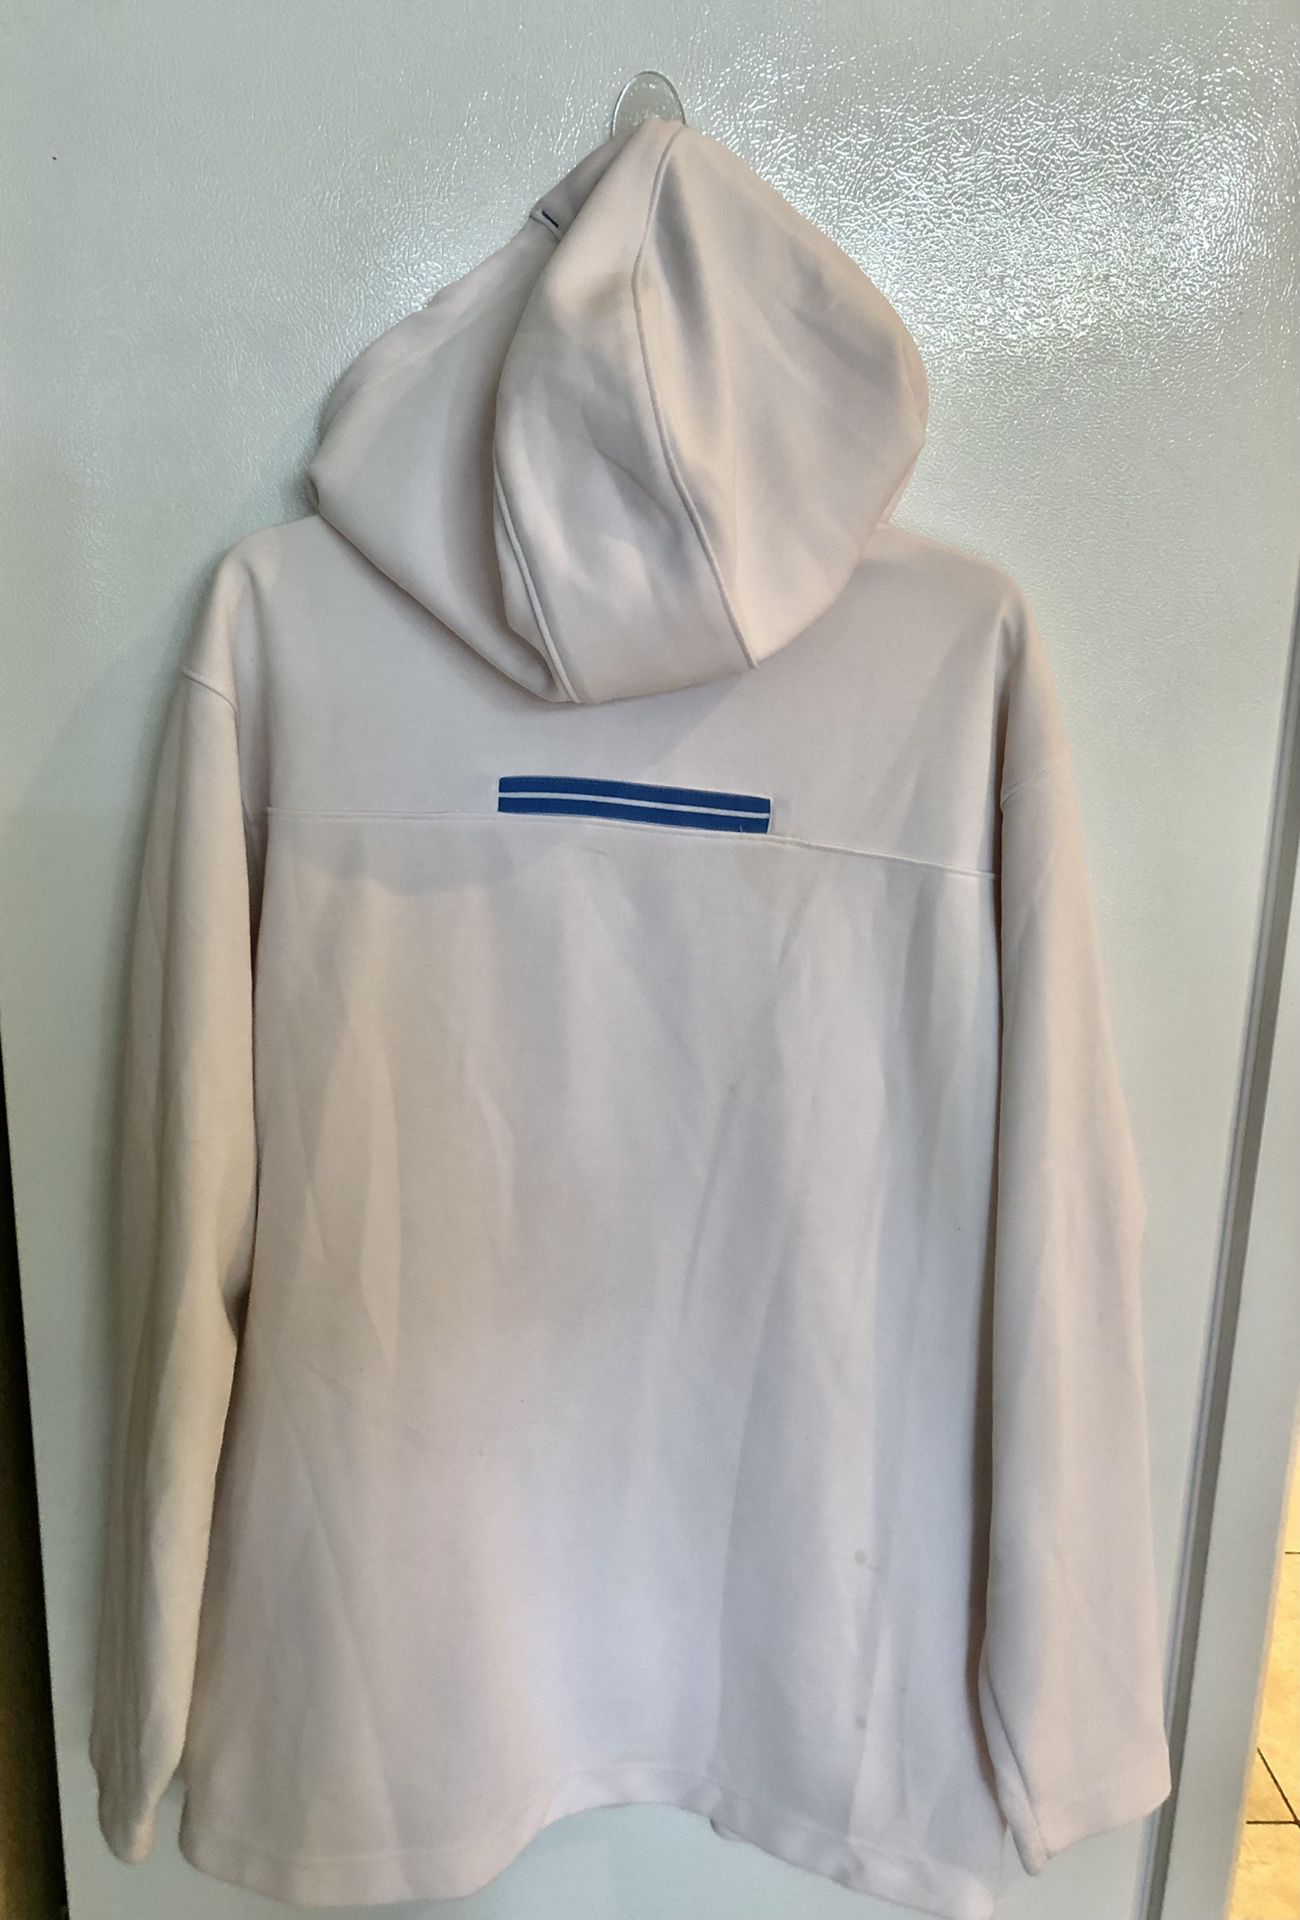 Men's JORDAN Jacket- Full Zip Up- Euc XL- White W Blue   The Picture Makes It Look Like Stains On Front But It’s Just Shadows Its In Great Condition